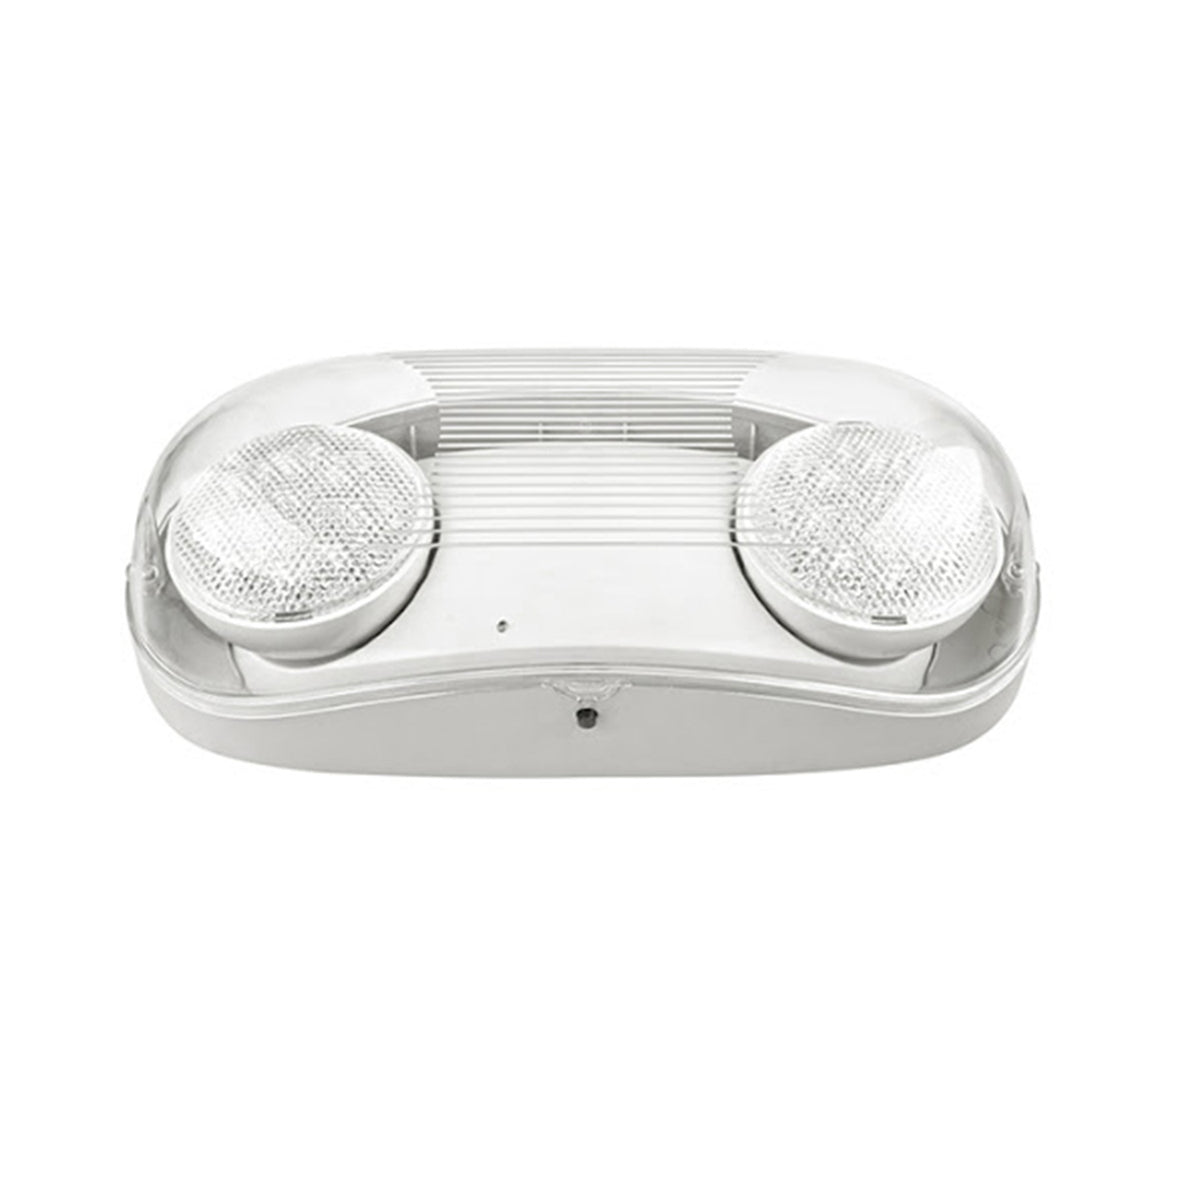 LED Outdoor Emergency Light - Dual Round Heads - 90+ Minutes Backup - IP65 Rated